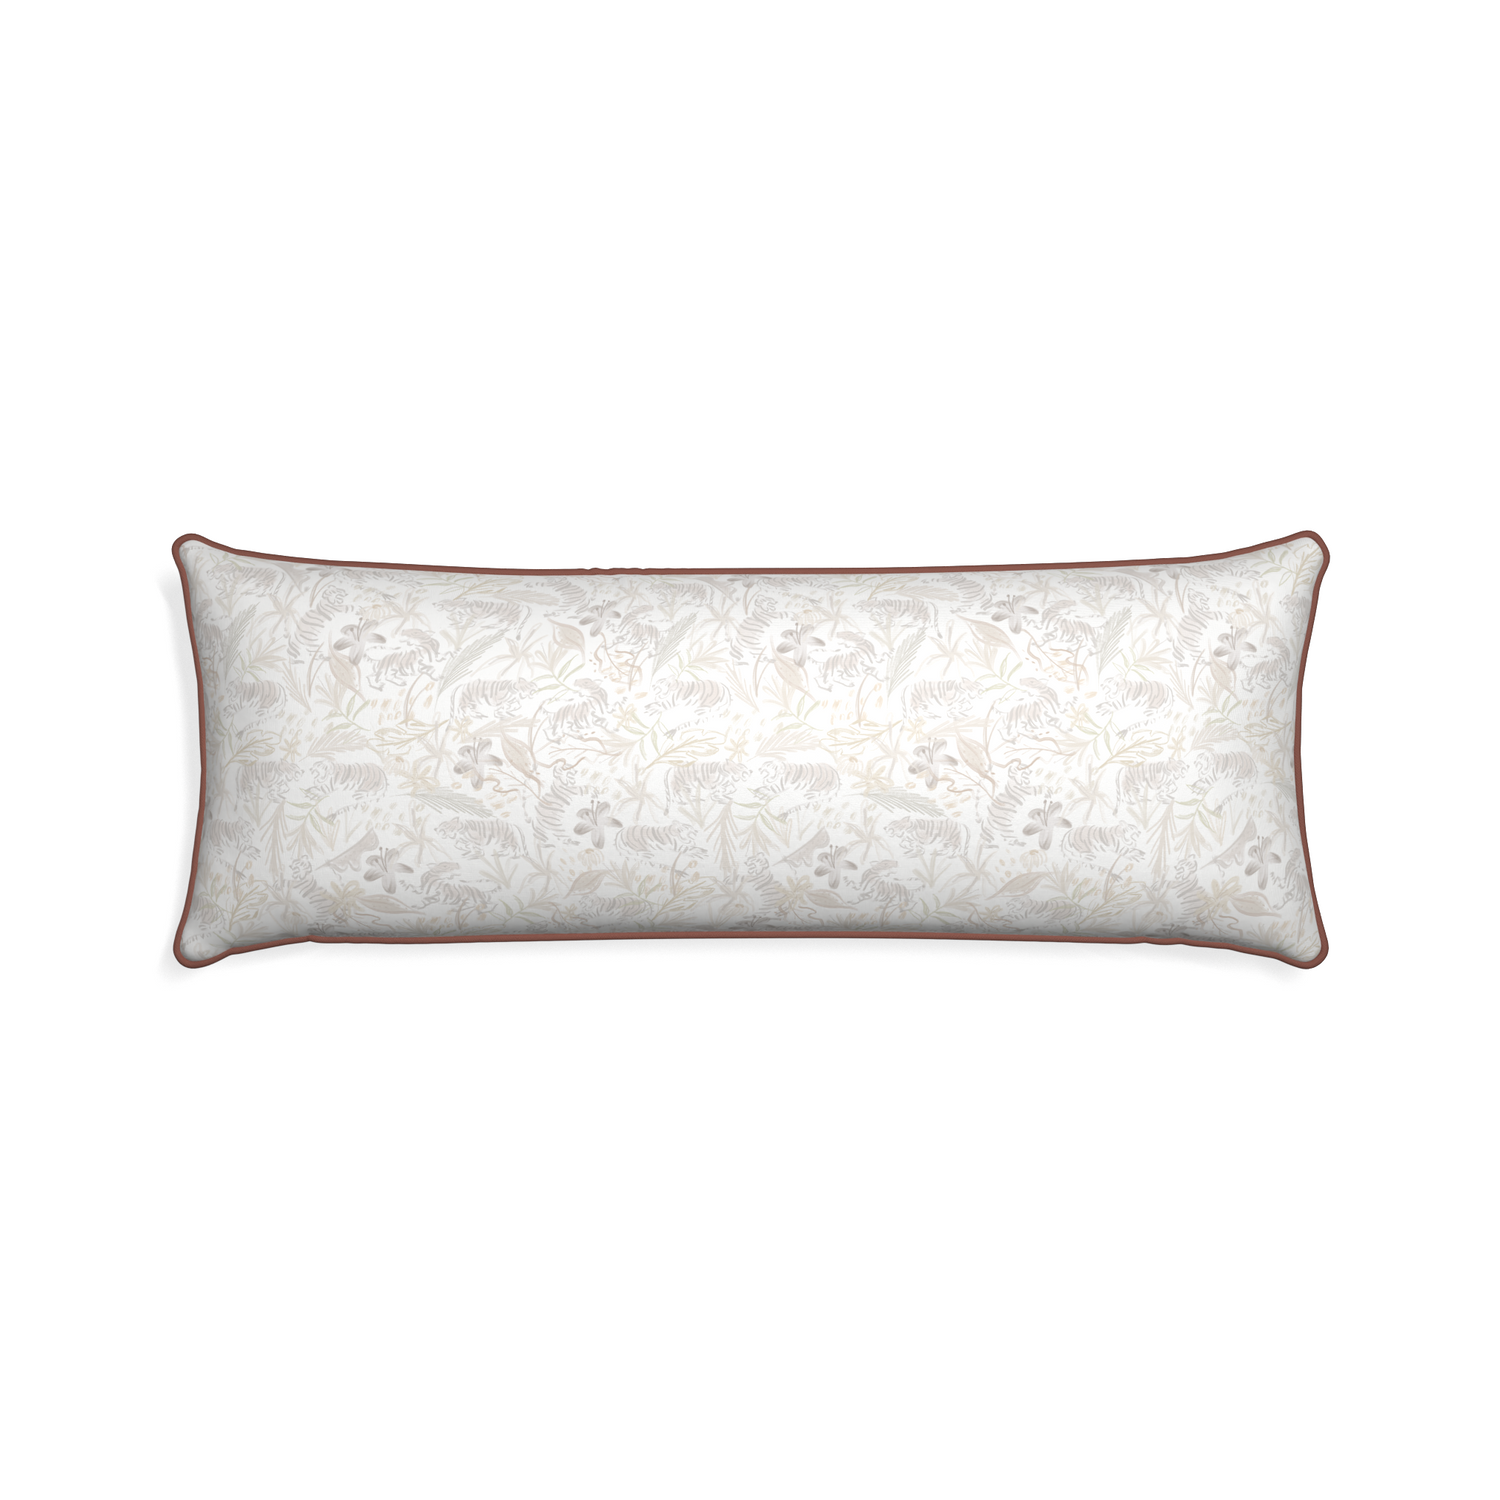 Xl-lumbar frida sand custom beige chinoiserie tigerpillow with w piping on white background